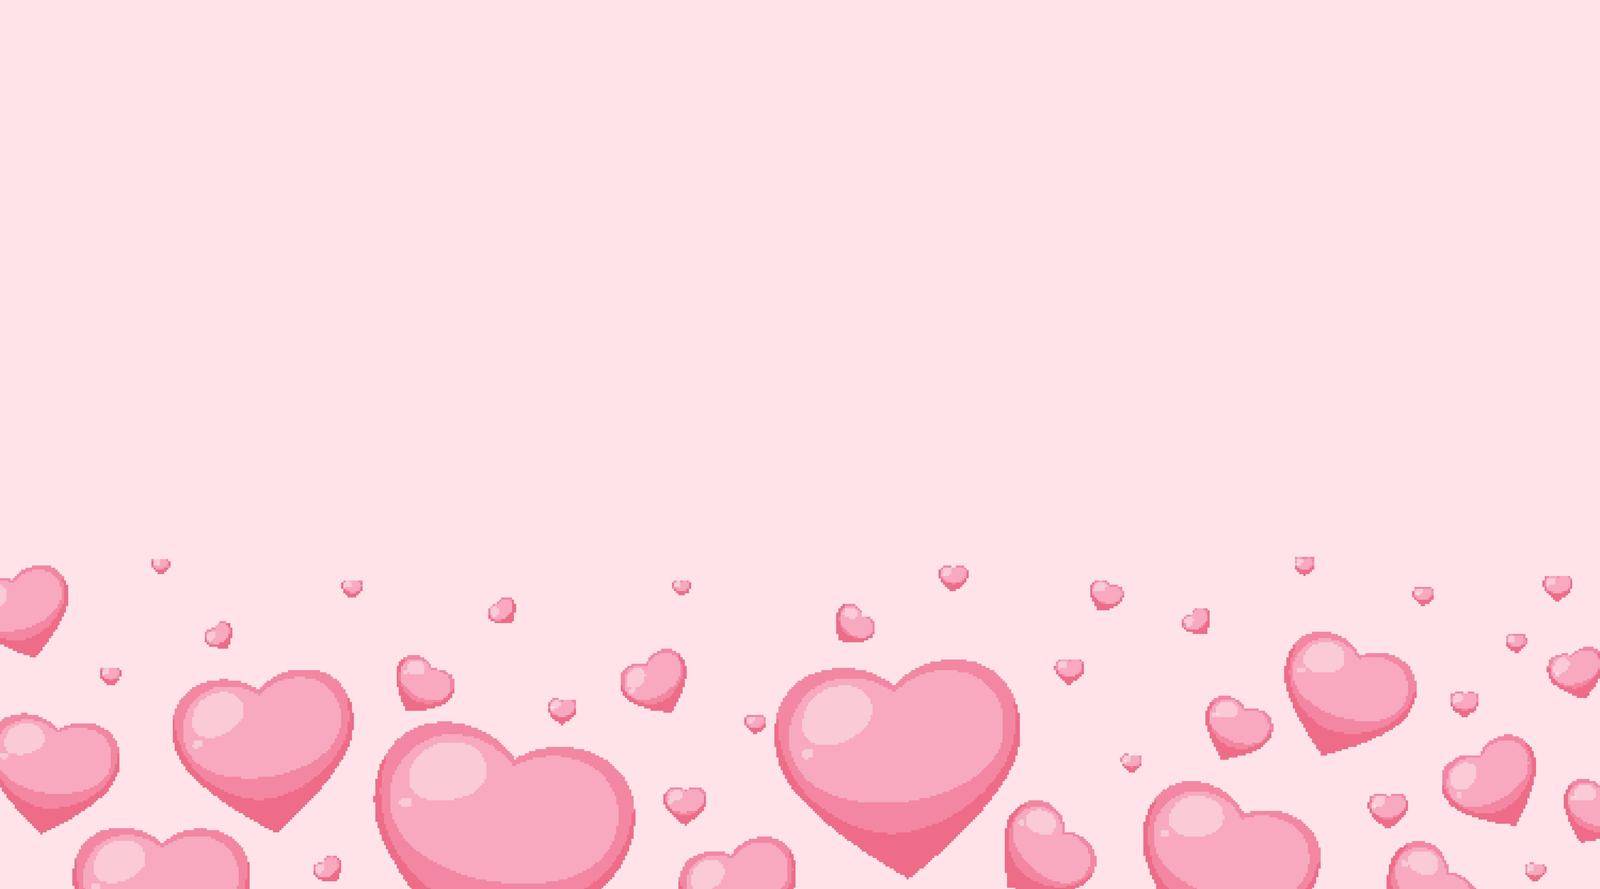 Valentine theme with pink hearts on pink background illustration